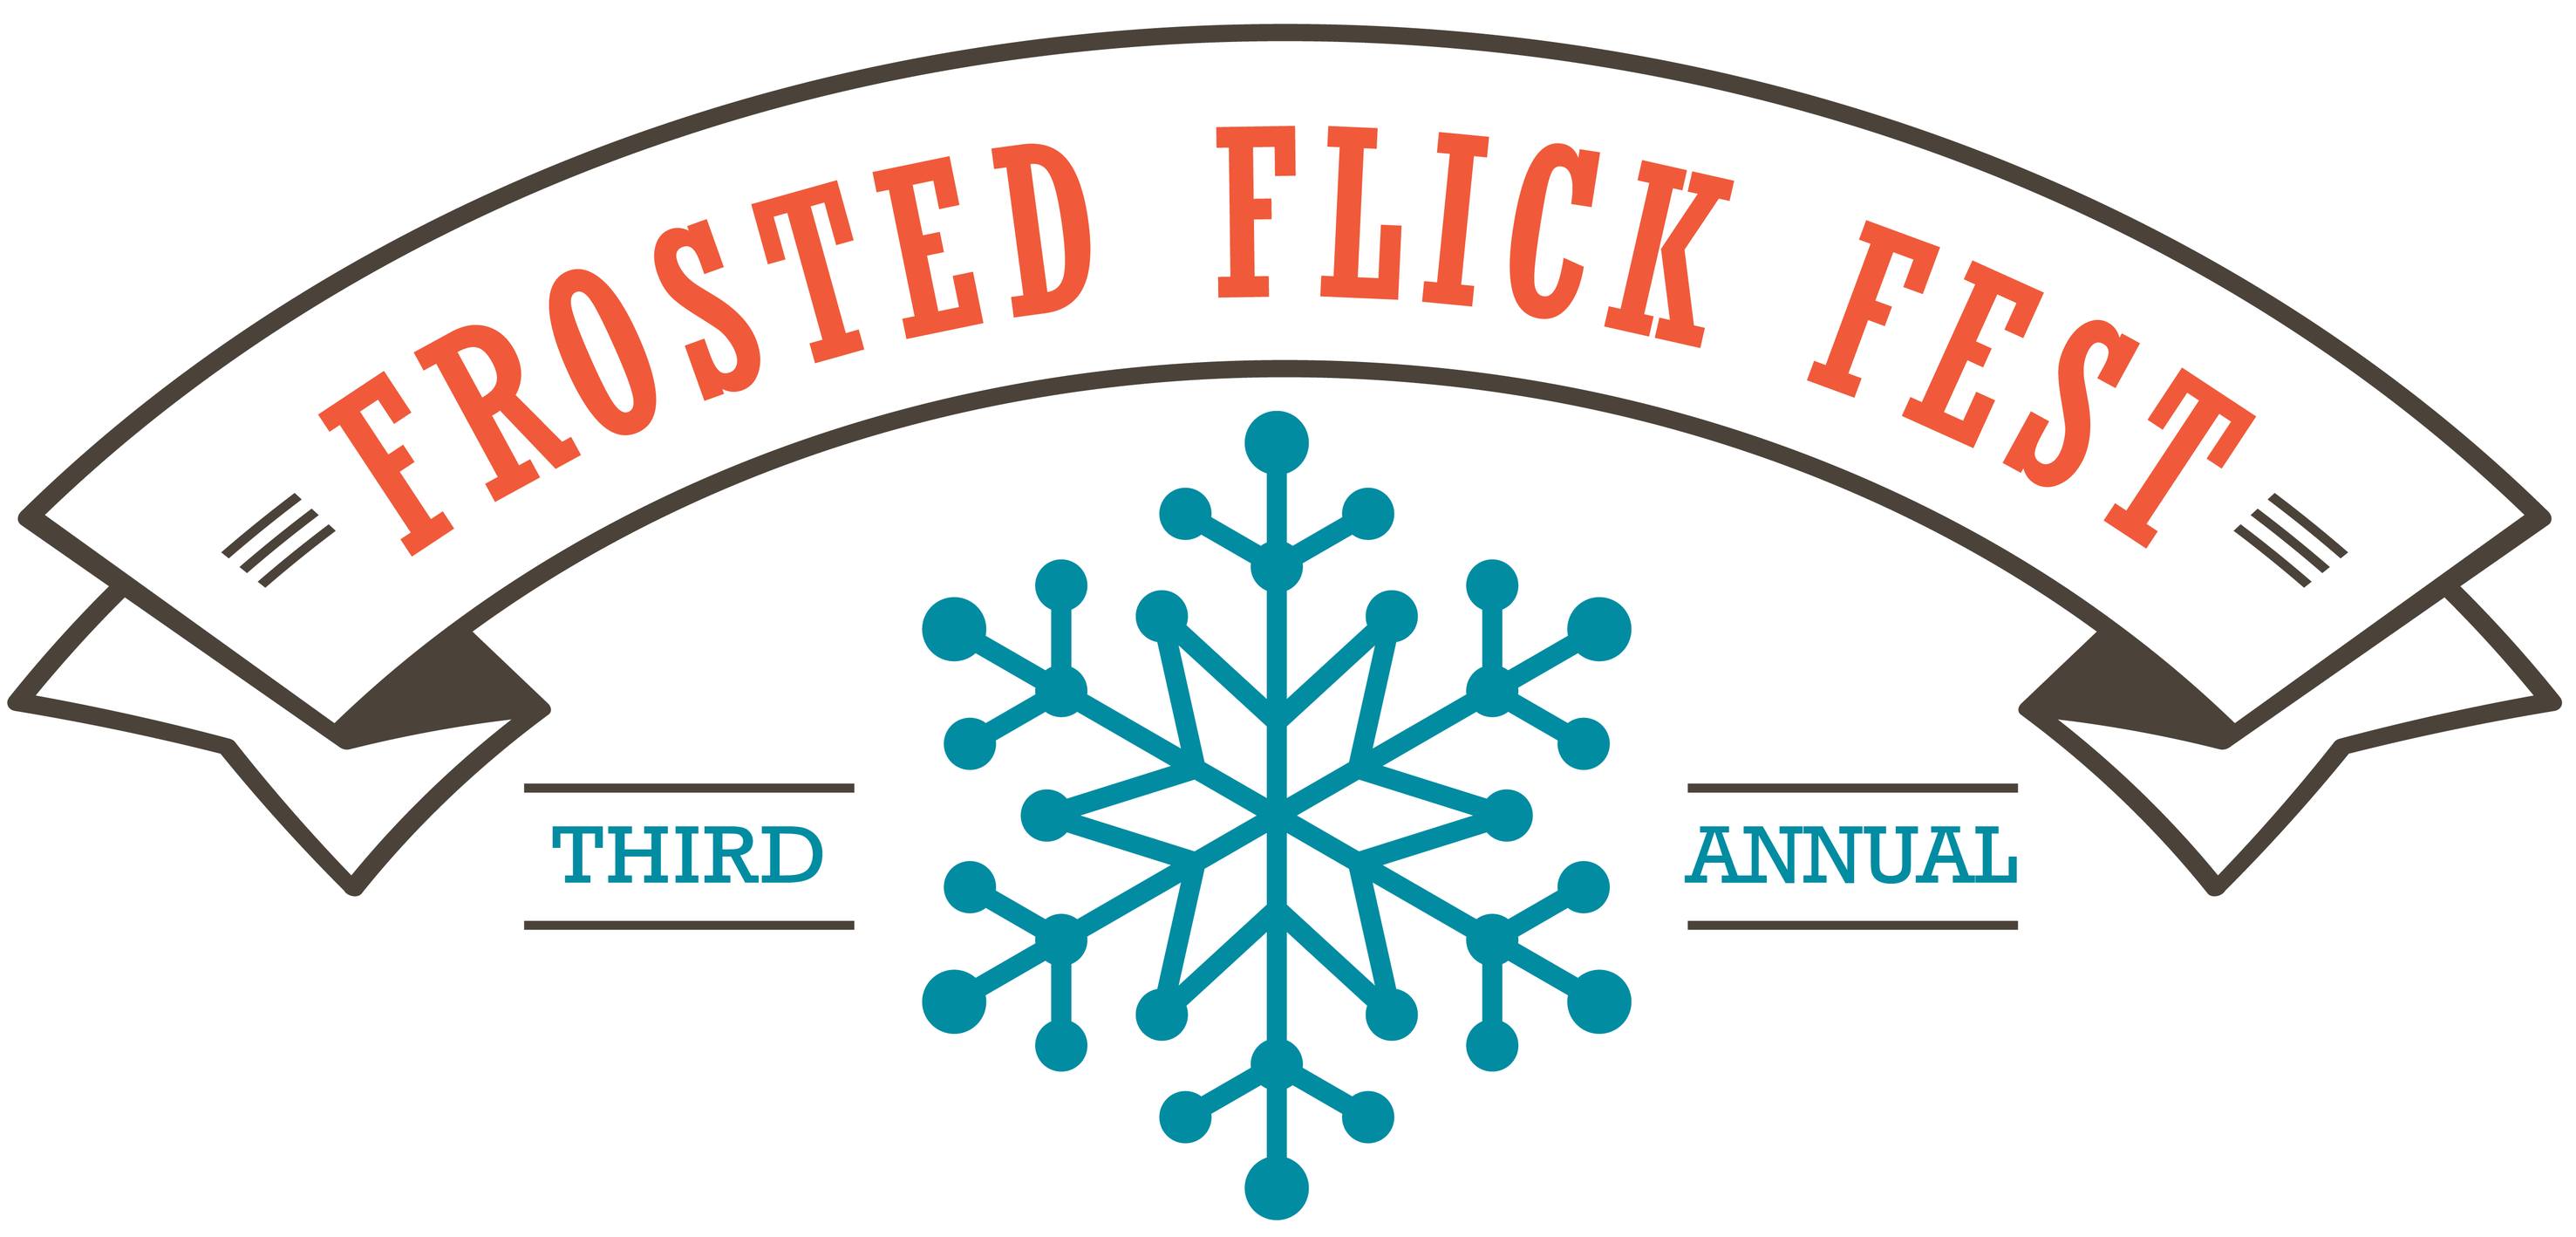 3rd Annual Frosted Flick Fest